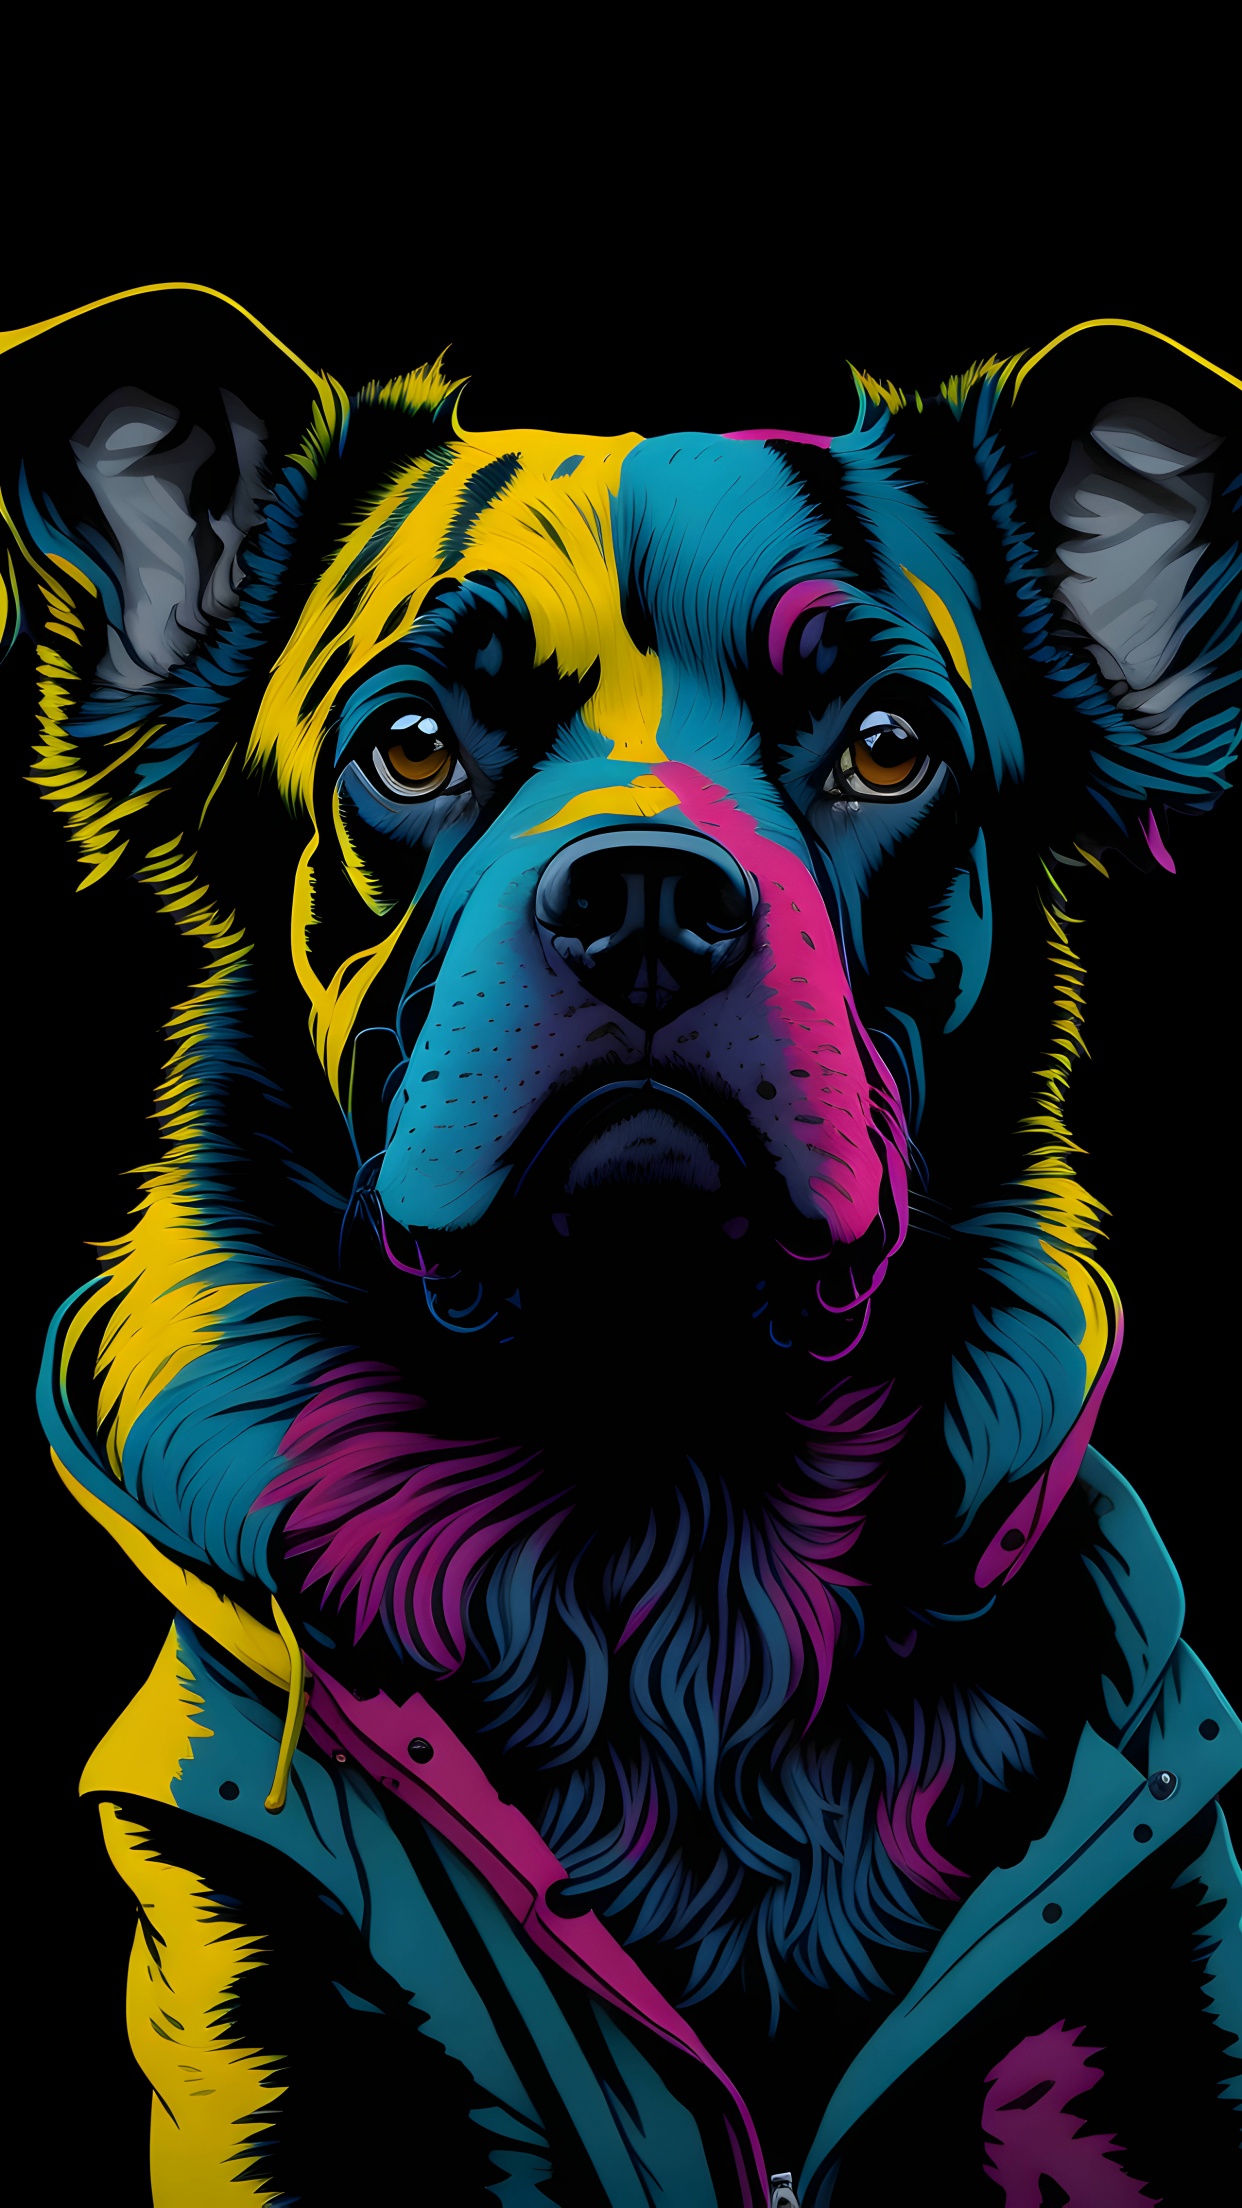 iPhone 12 Pro Max Wallpapers on WallpaperDog